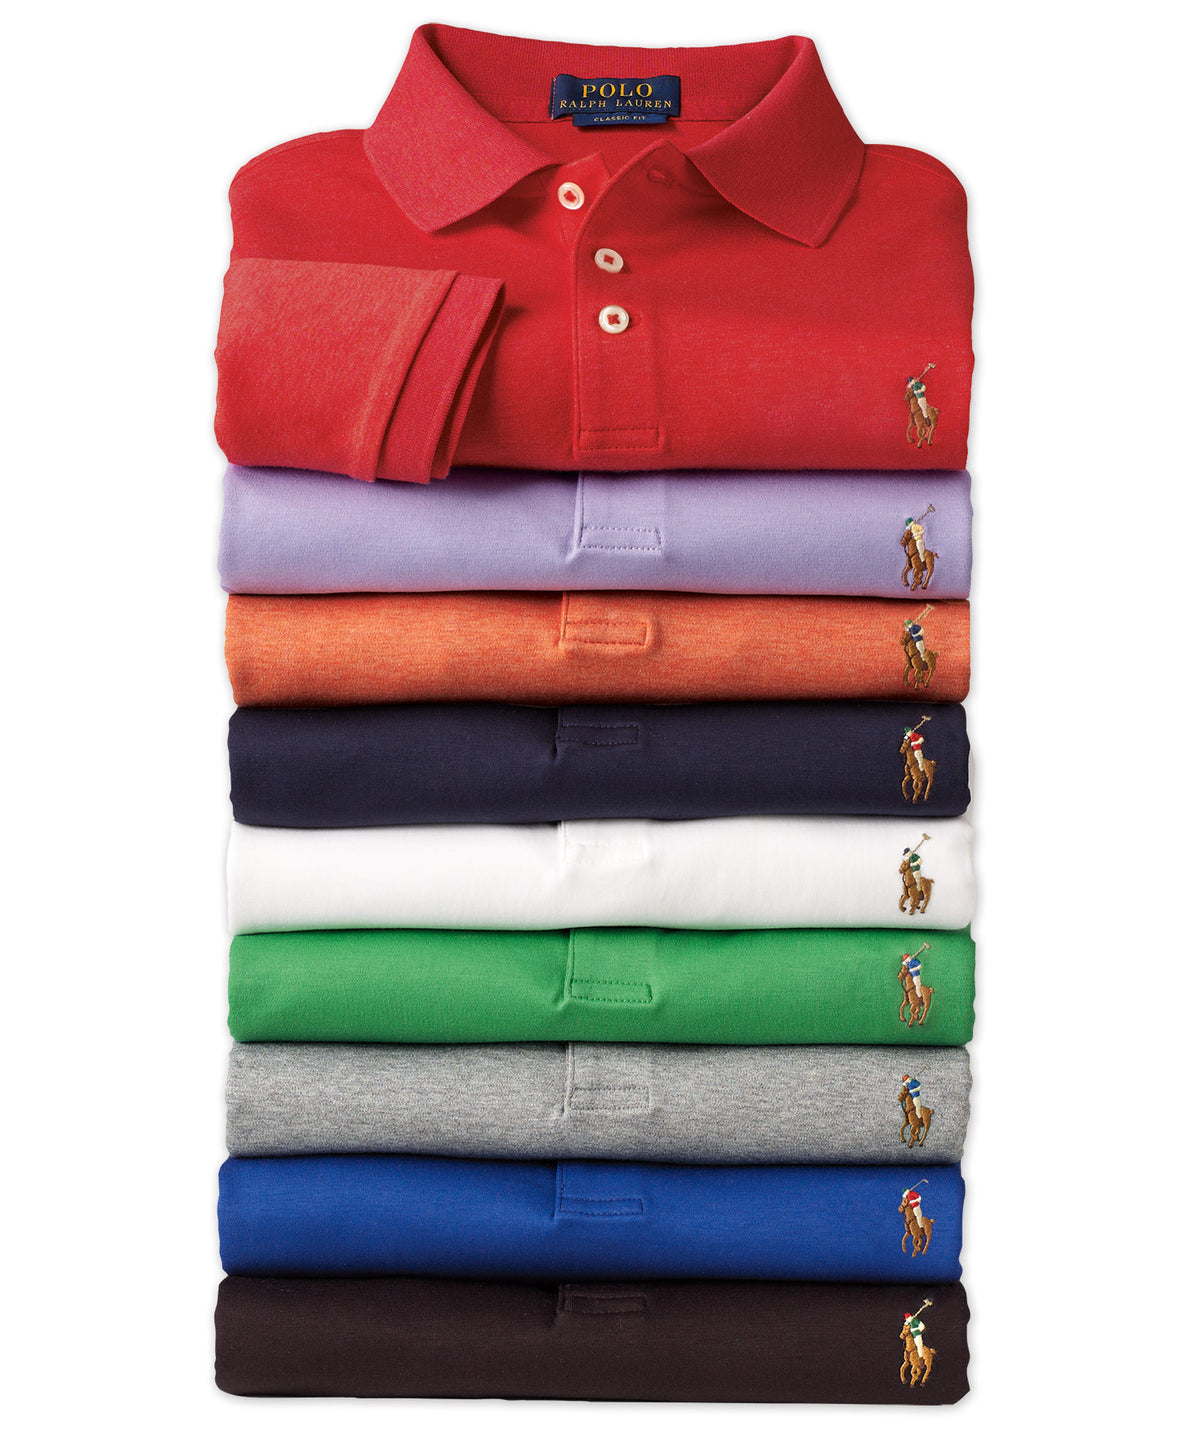 How to Pull Off a Look with a Ralph Lauren Polo Shirt